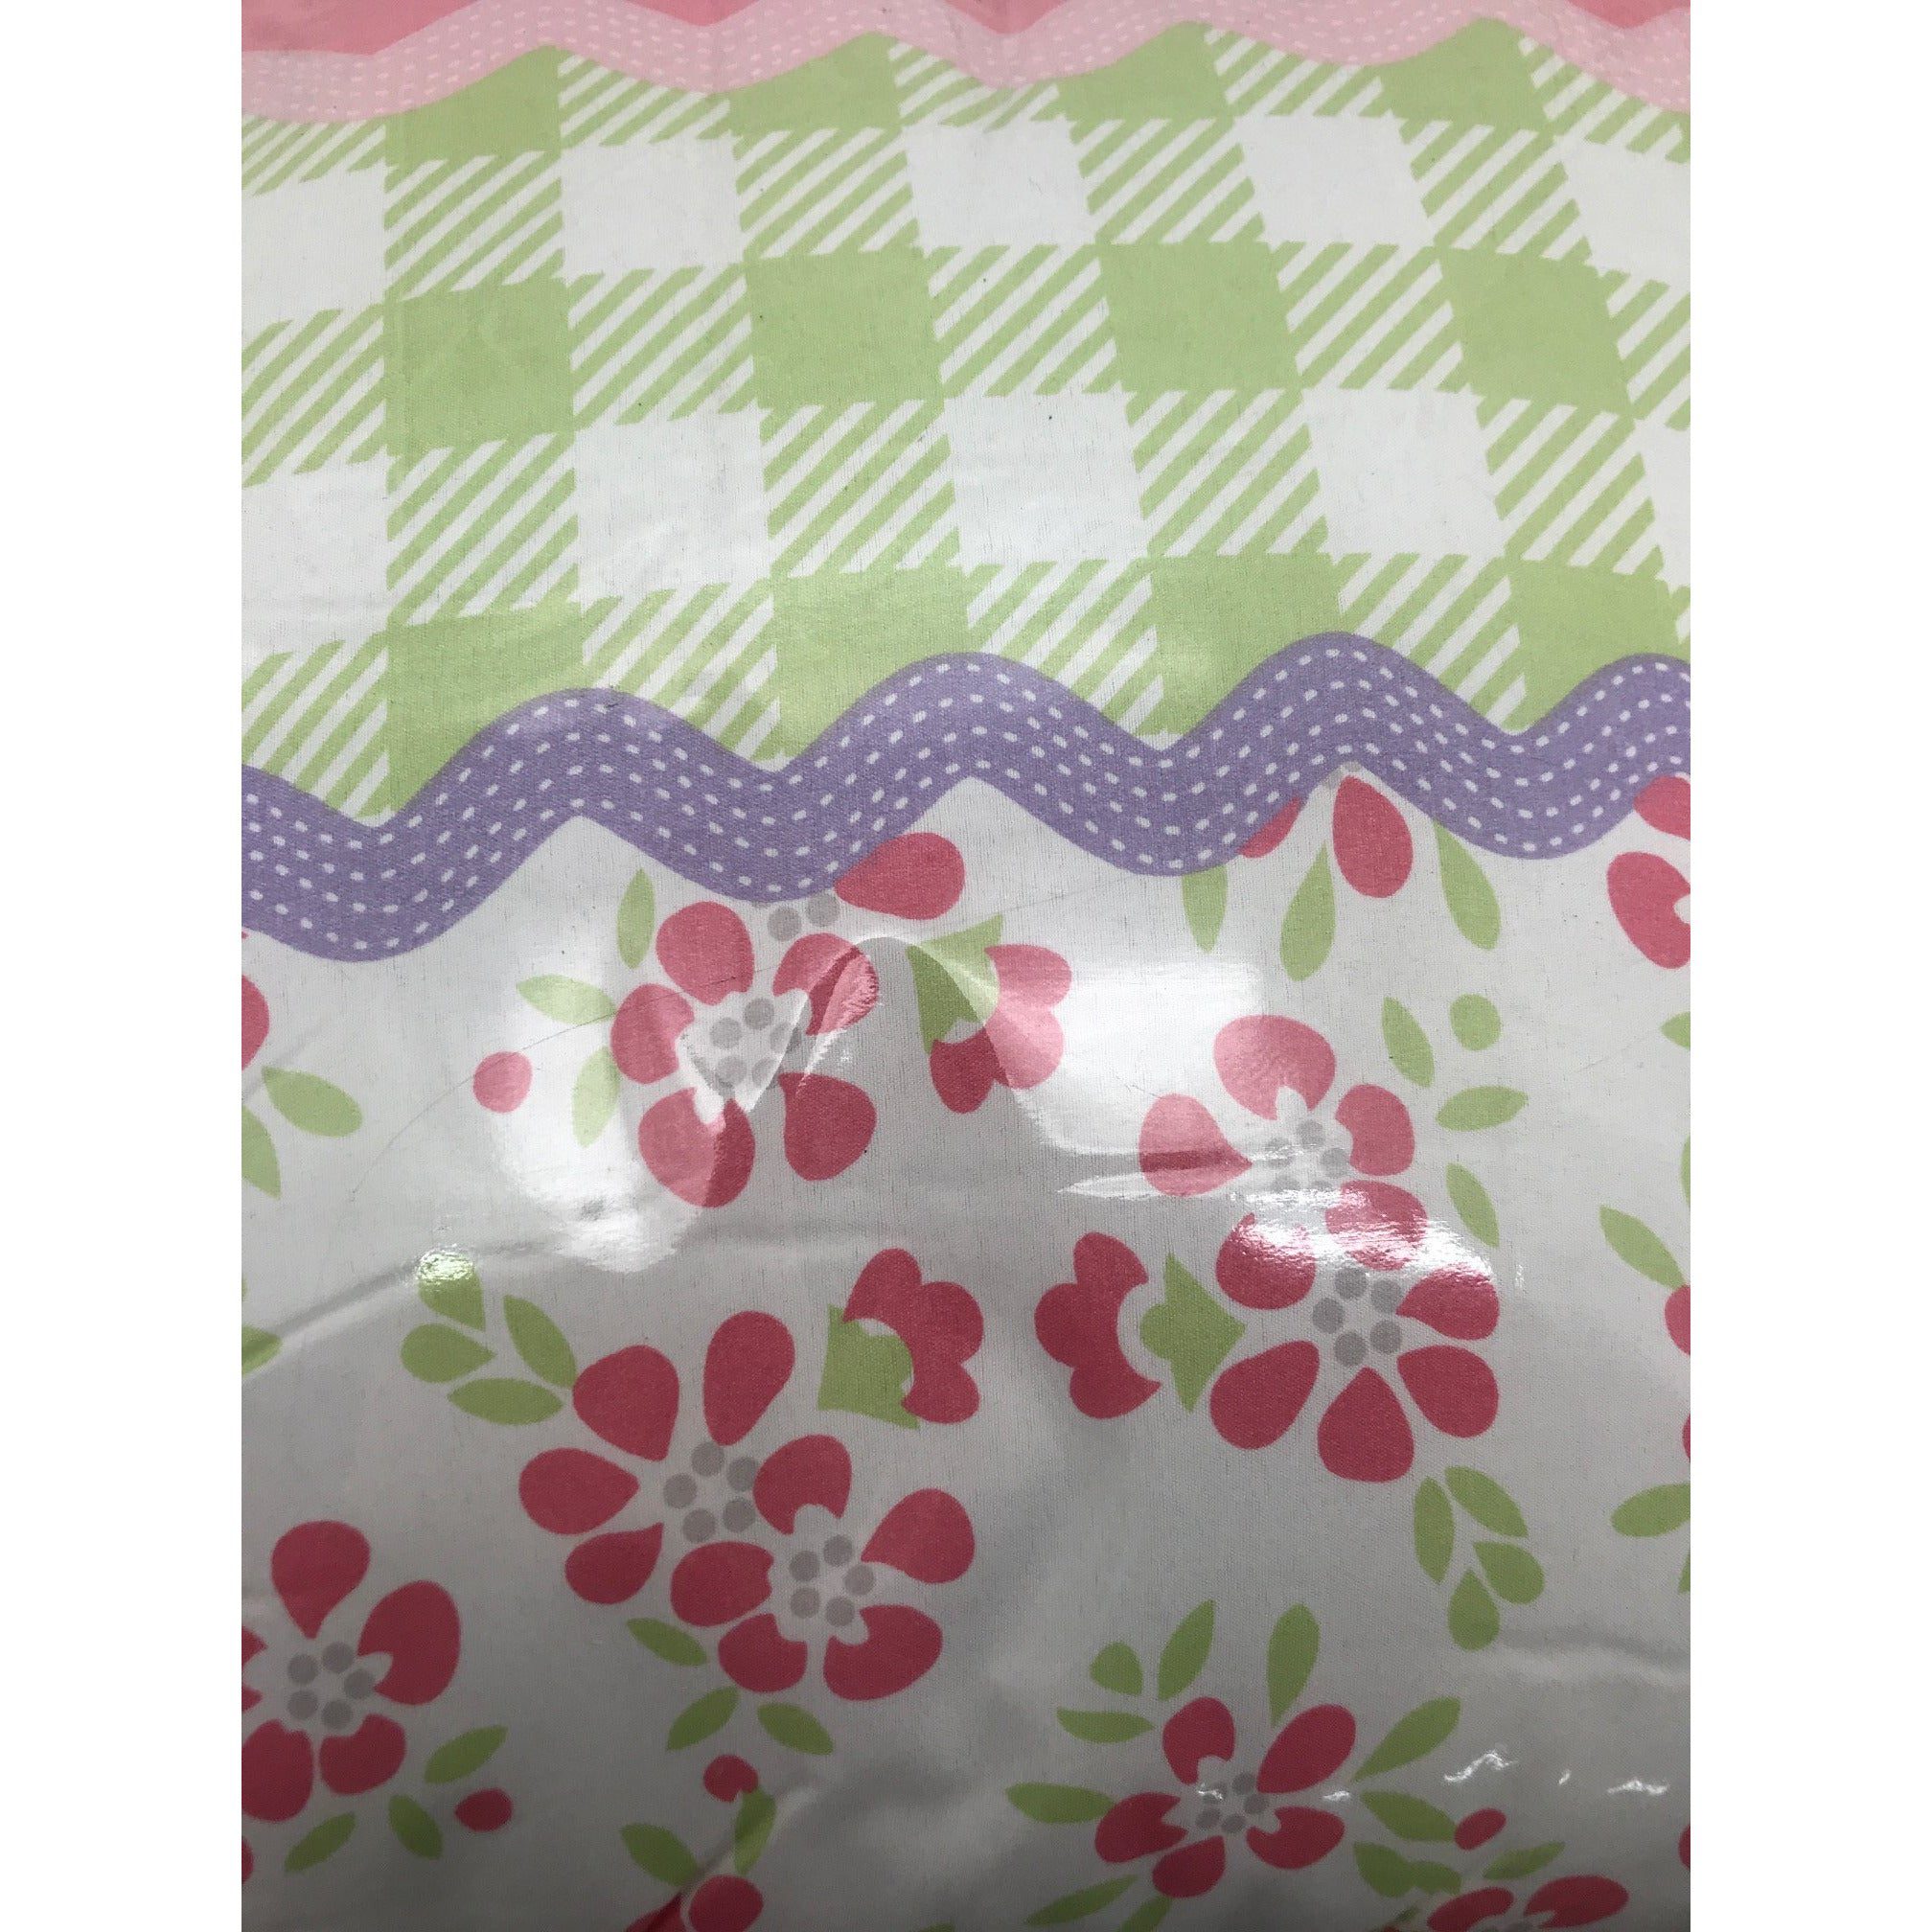 Kids Bed 2 Piece Twin Comforter Set / Comforter / Pillow Sham / Graphic Prints / 100% Polyester